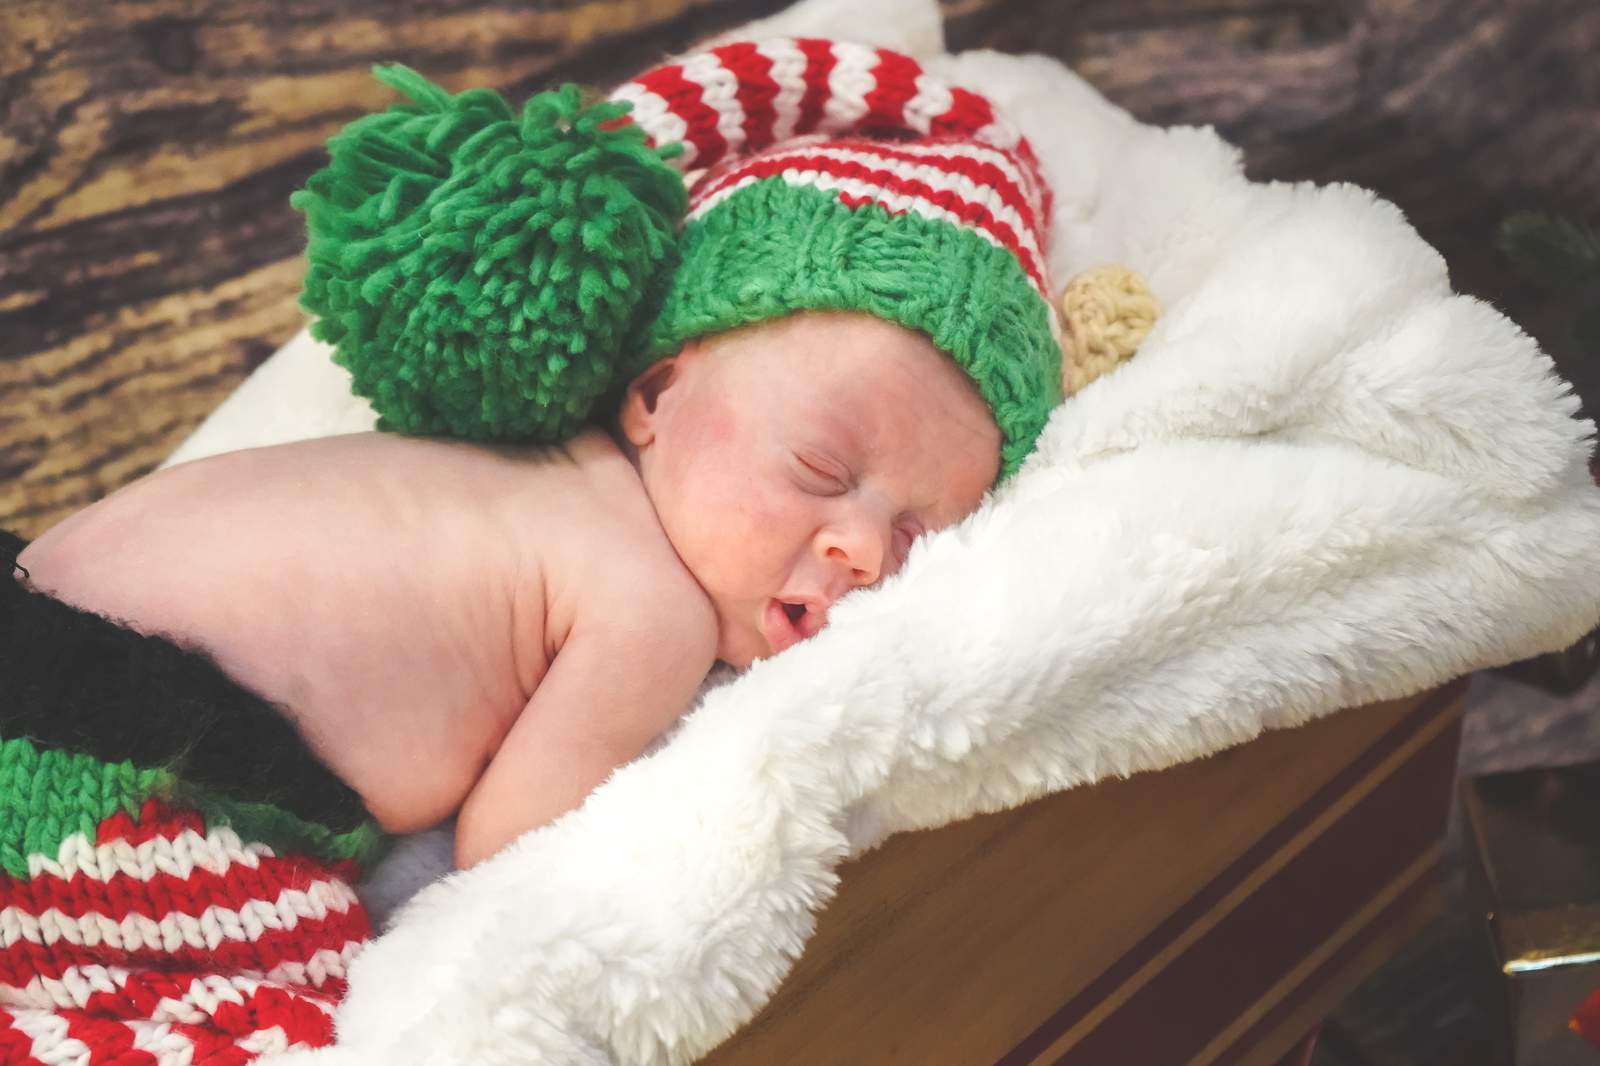 Photos: Babies in NICU at DMC Children’s Hospital dressed up for holiday